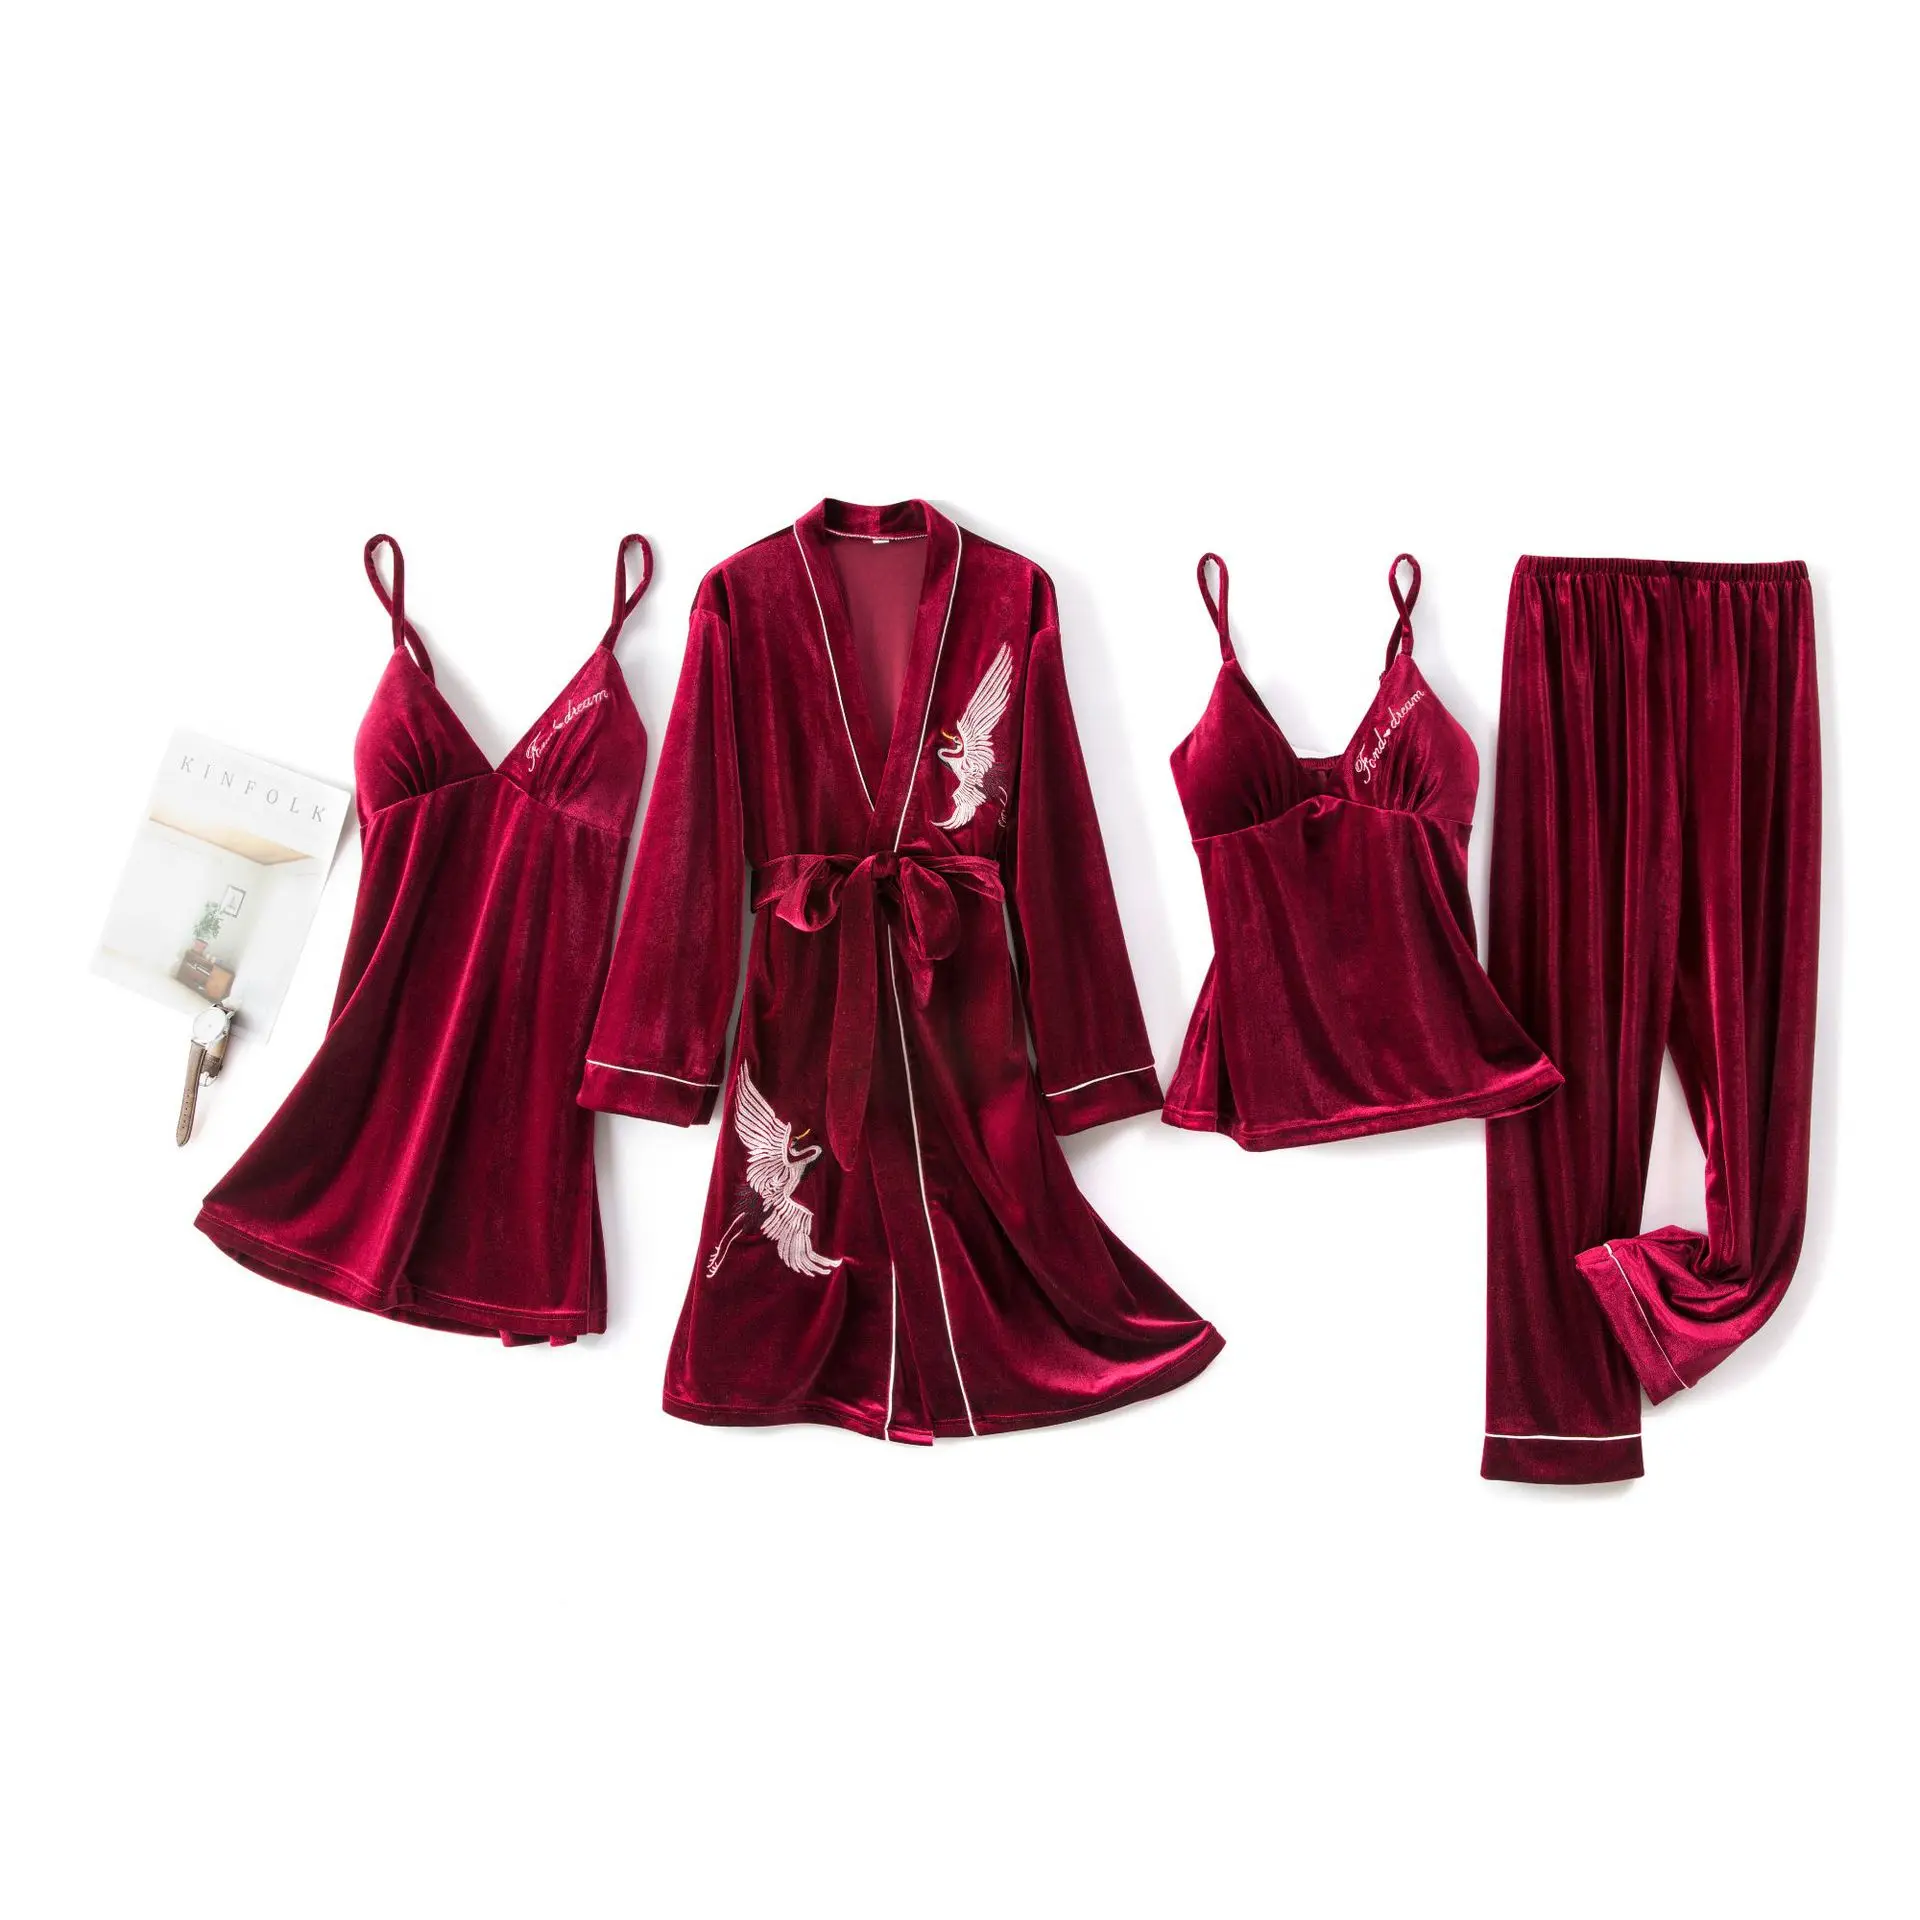 

JULY'S SONG 4 Pieces Elegant Pajamas Embroidery Gold Velvet Sleepwear For Women Sexy V Neck Strap Sling Homewear With Chest Pad, Burgundy;navy blue;gray;pink